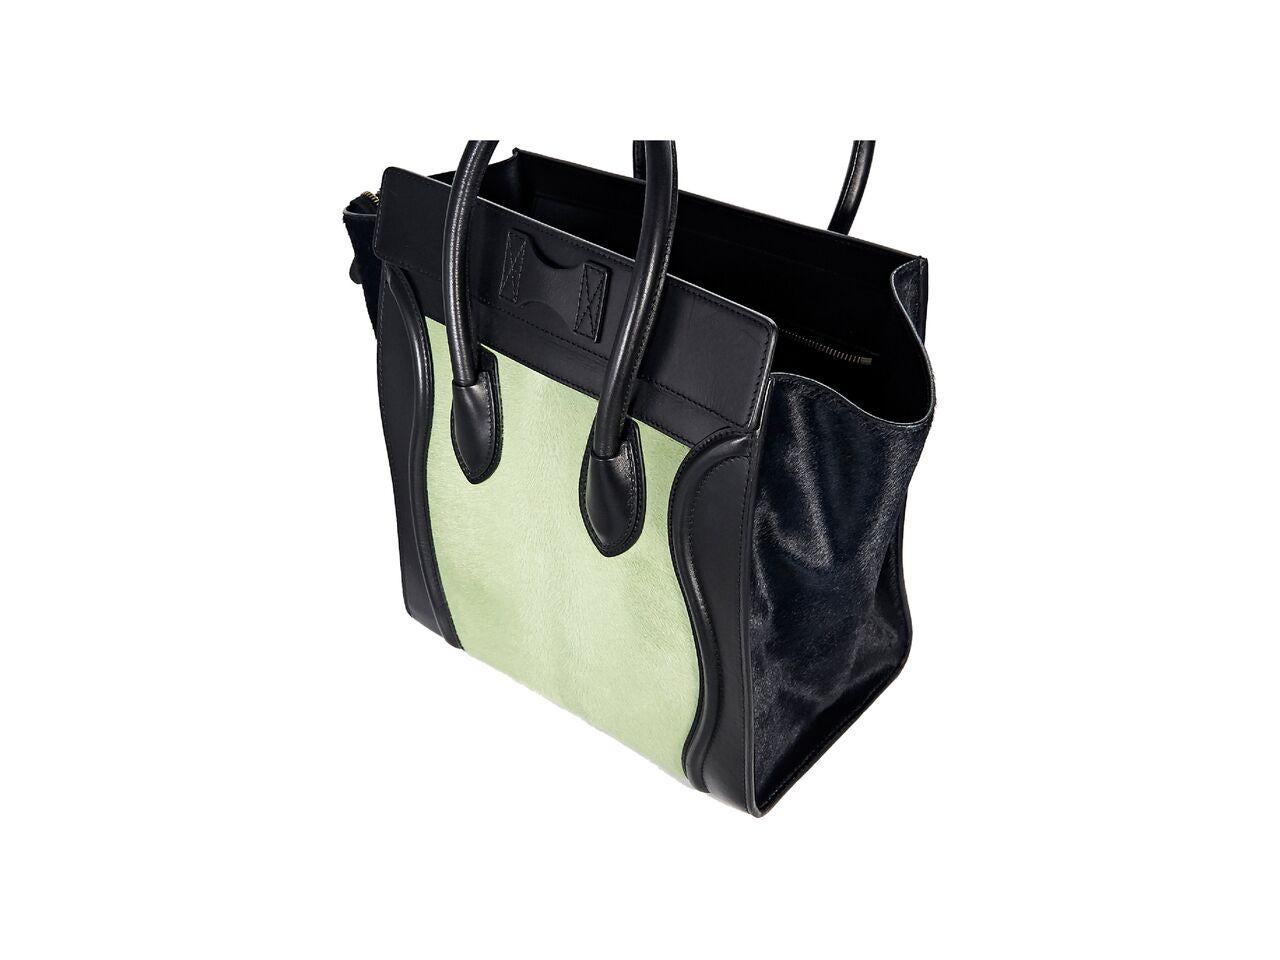 Product details:  Black and mint green pony hair luggage tote bag by Celine.  Trimmed with leather.  Top carry handles.  Top zip closure.  Leather interior with inner zip and slide pockets.  Front exterior zip pocket.  Protective metal feet. 